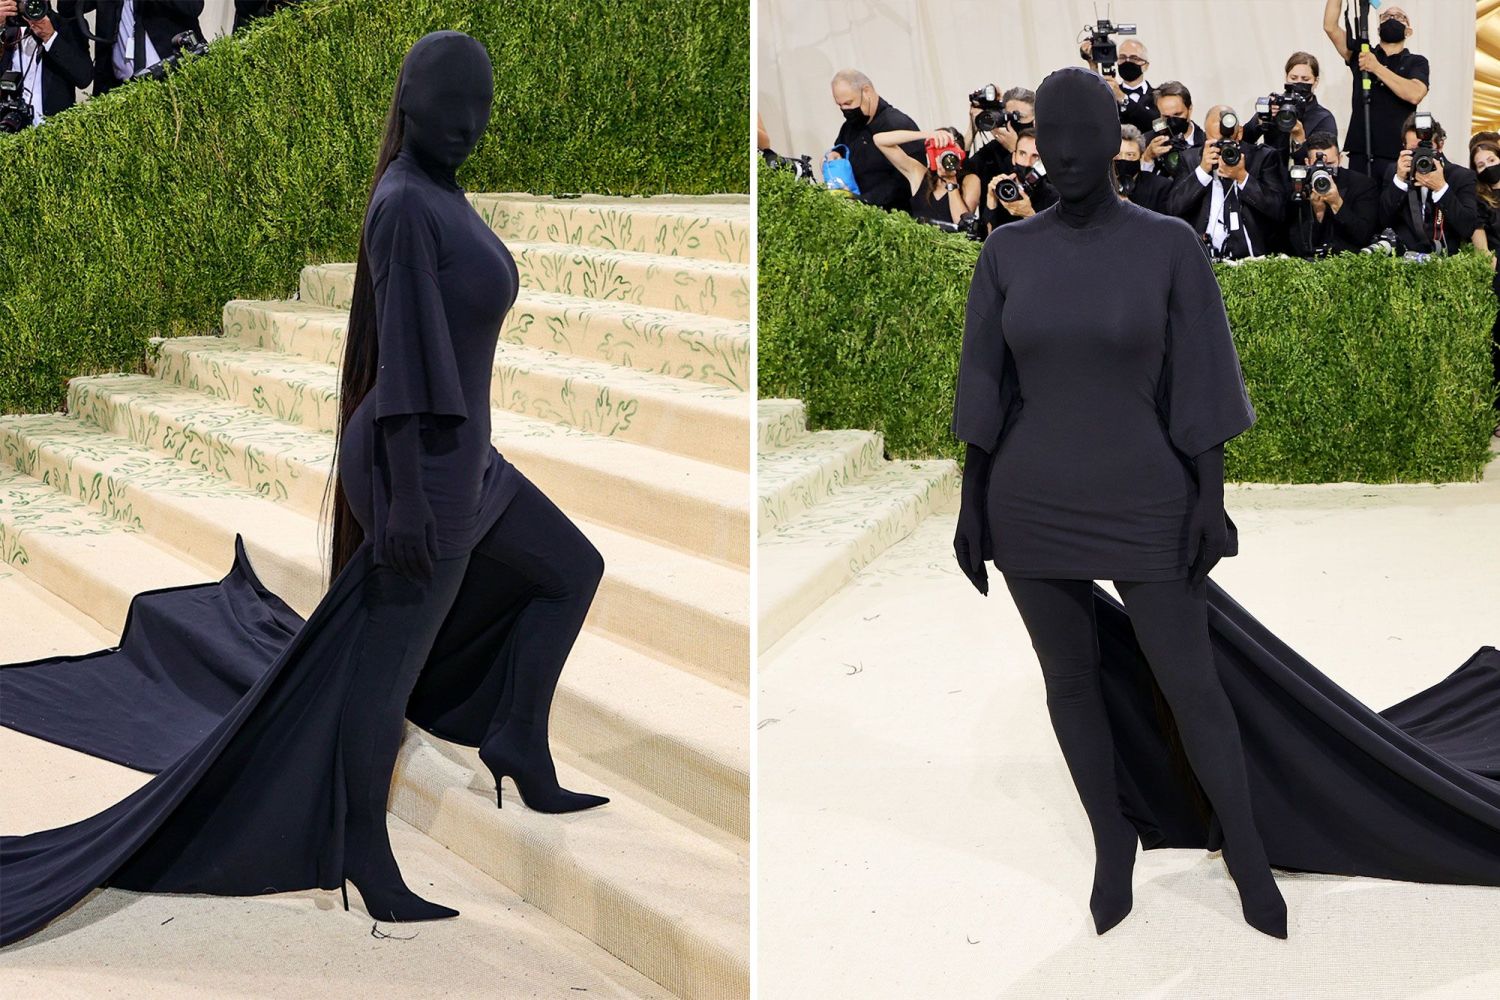 20 Celebs Who Turned Up The Heat With Their Outfits At The 2021 Met Gala